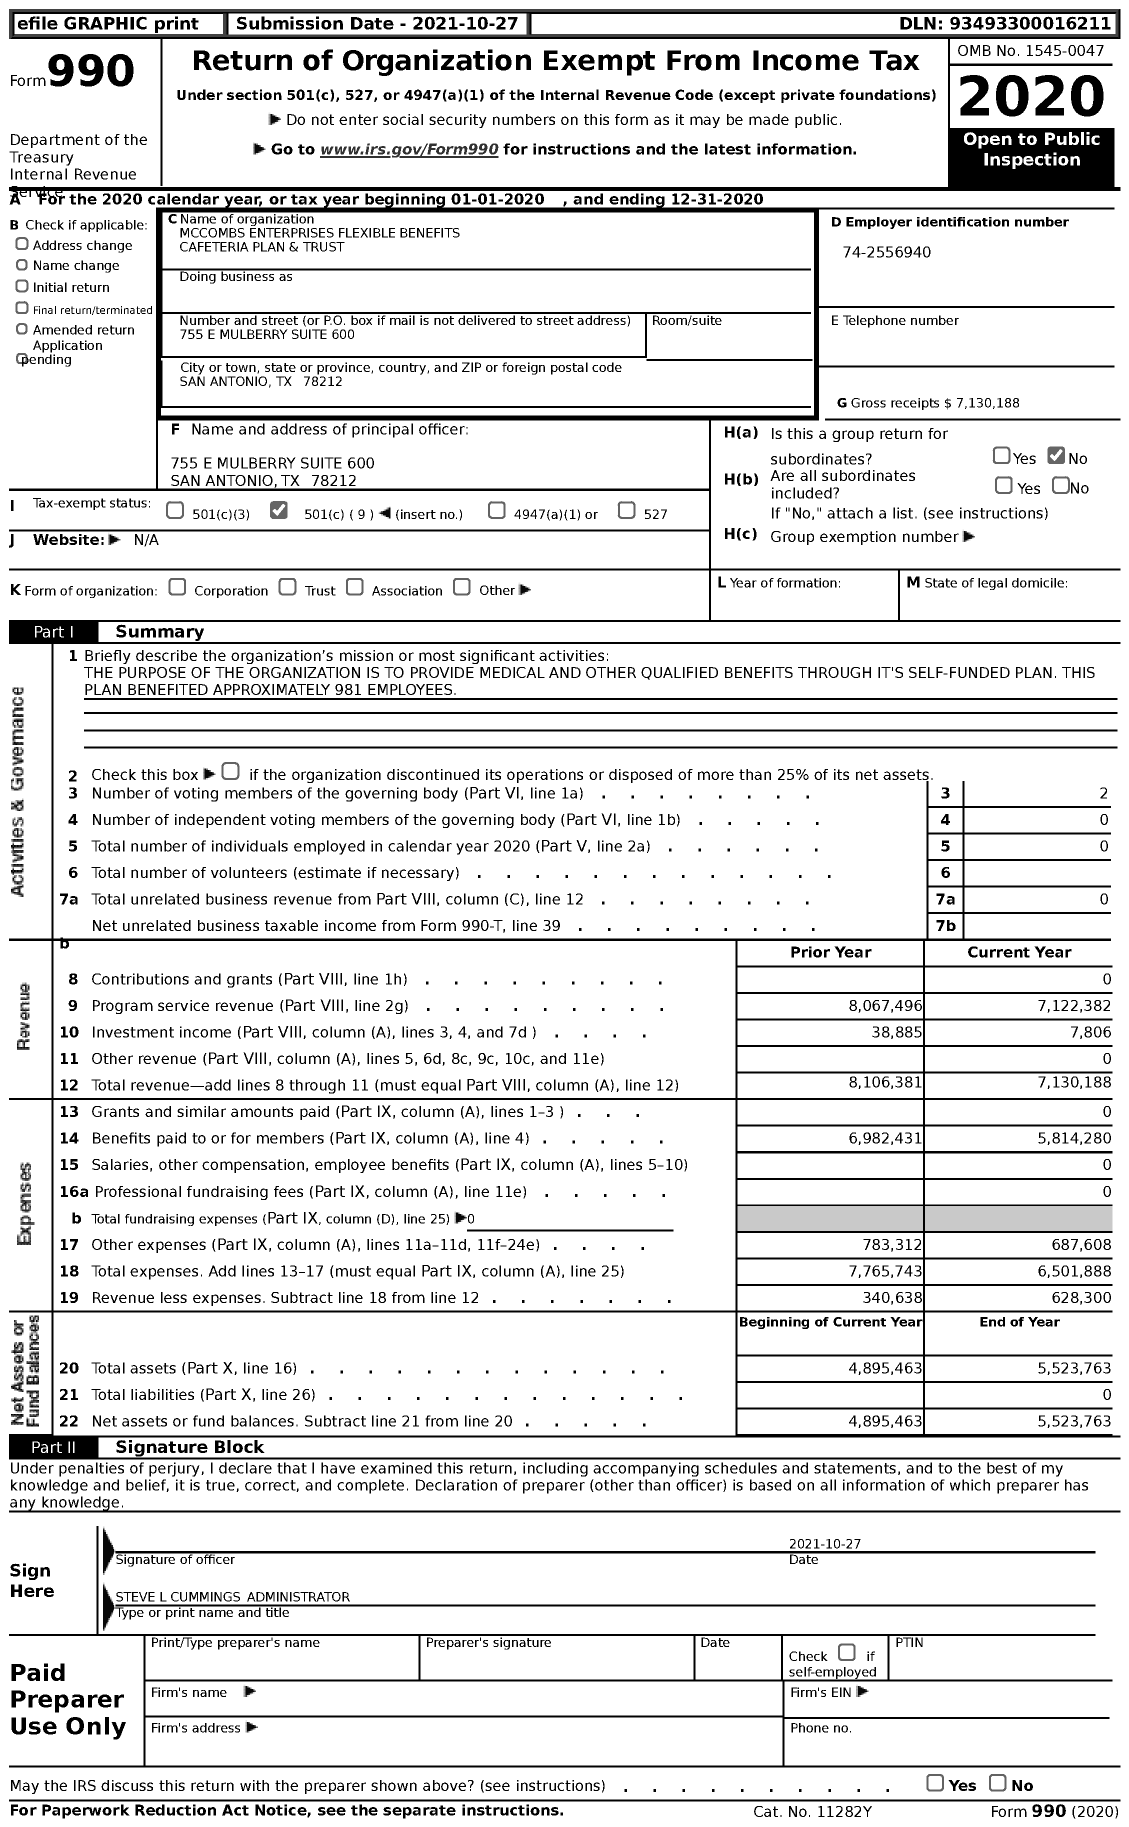 Image of first page of 2020 Form 990 for Mccombs Enterprises Flexible Benefits Cafeteria Plan and Trust